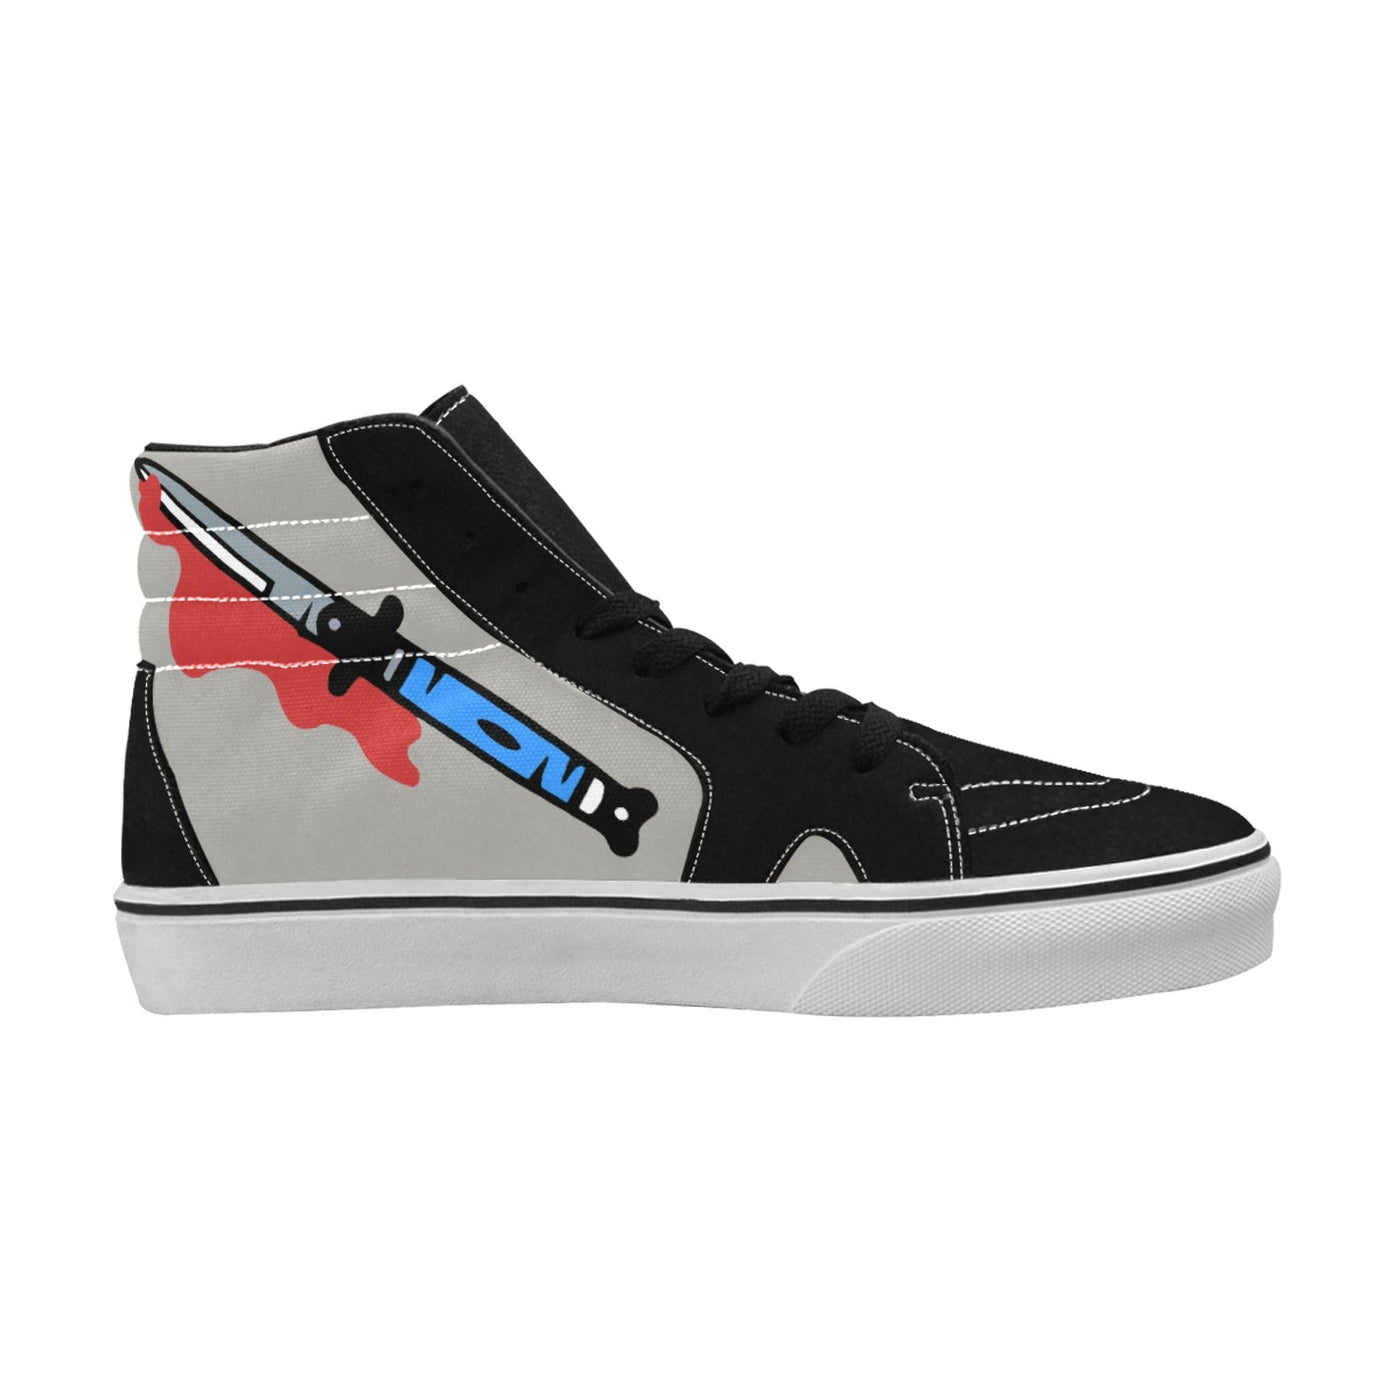 Retro Switchblade knife High Top Sk8 Sneakers